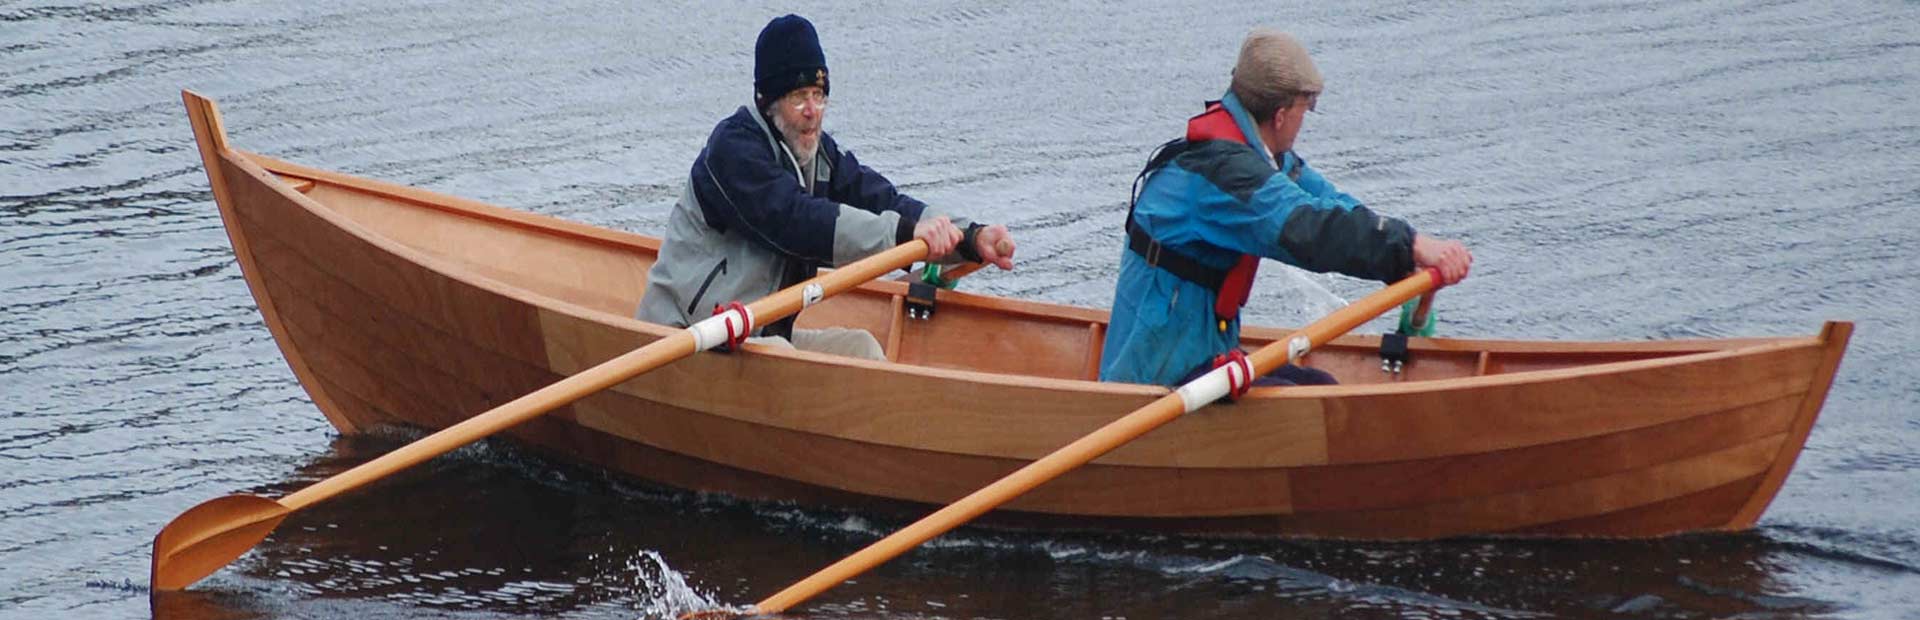 Two men in wooden rowboat on a lake, rowing.